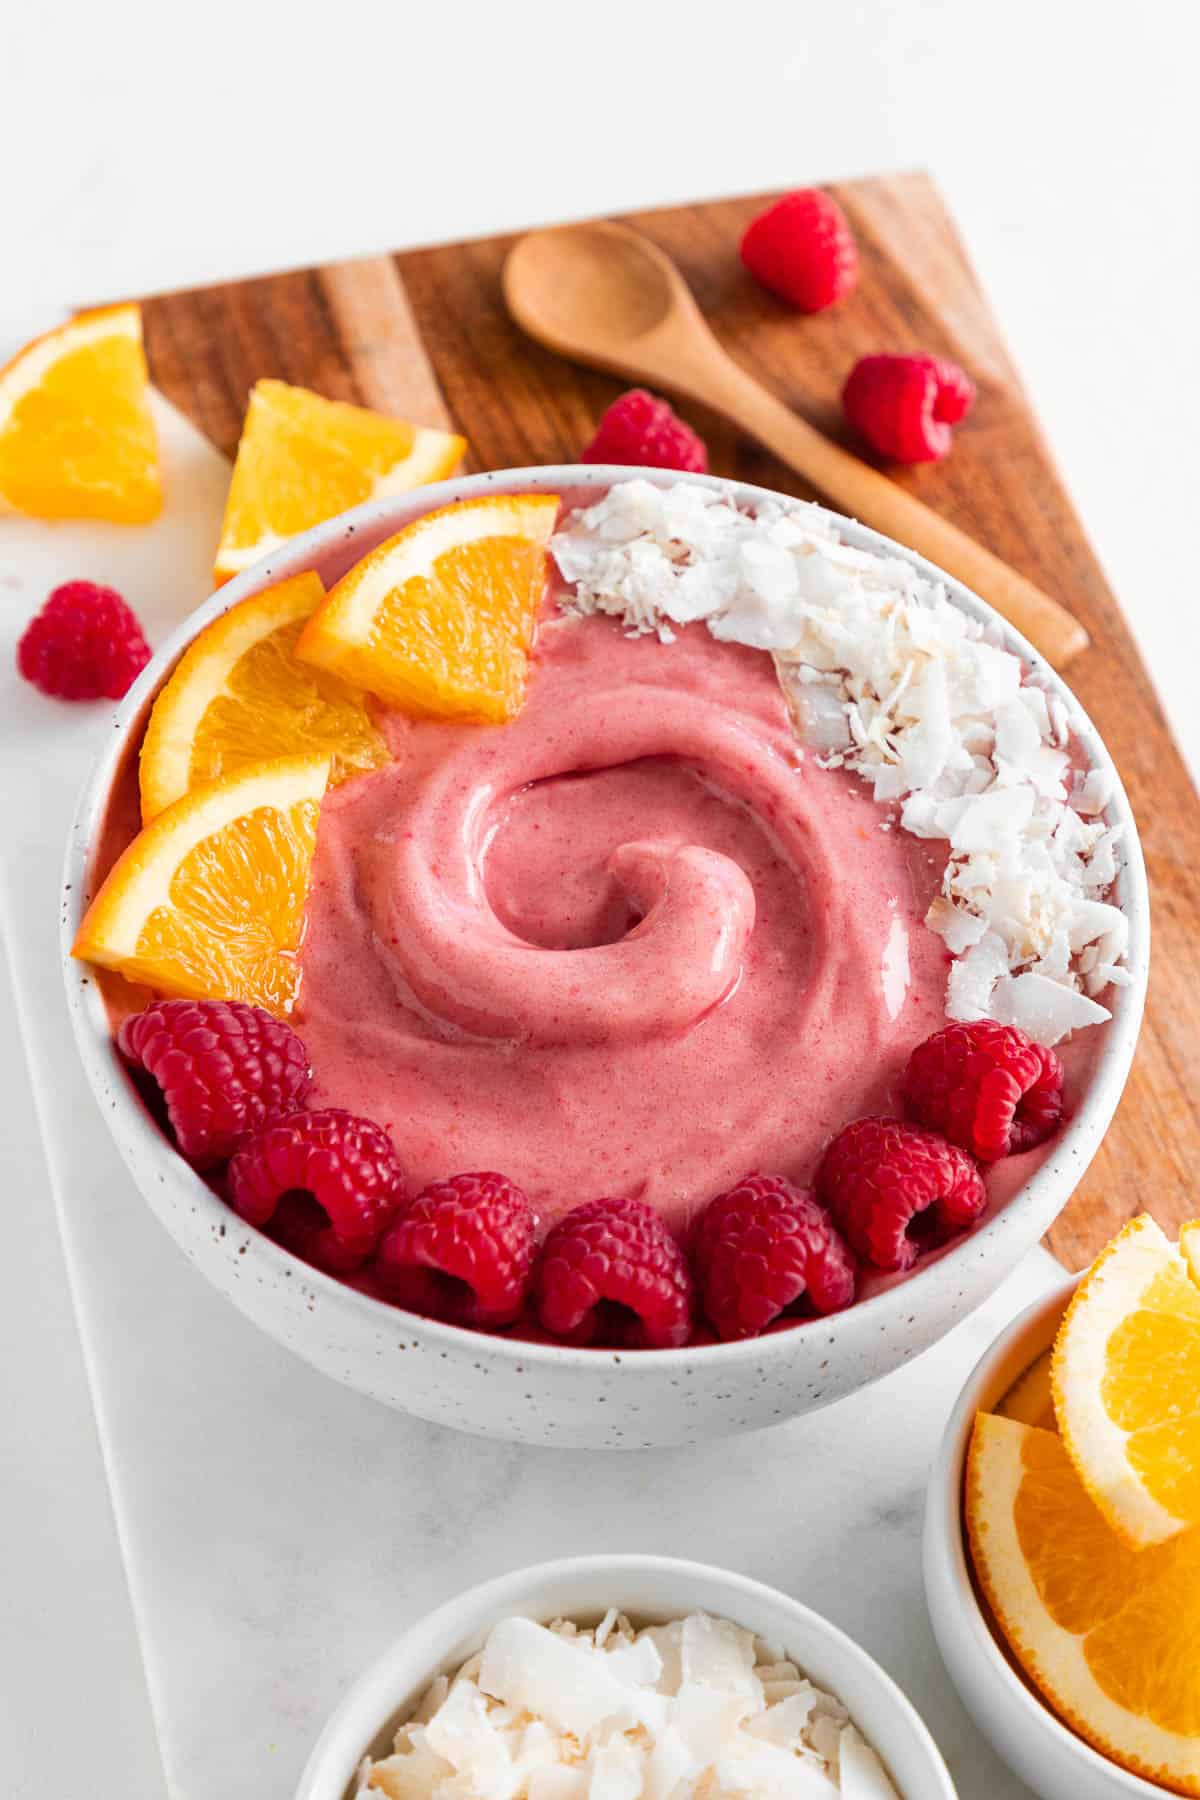 a raspberry smoothie inside a ceramic bowl, surrounded by orange slices, coconut flakes, and berries